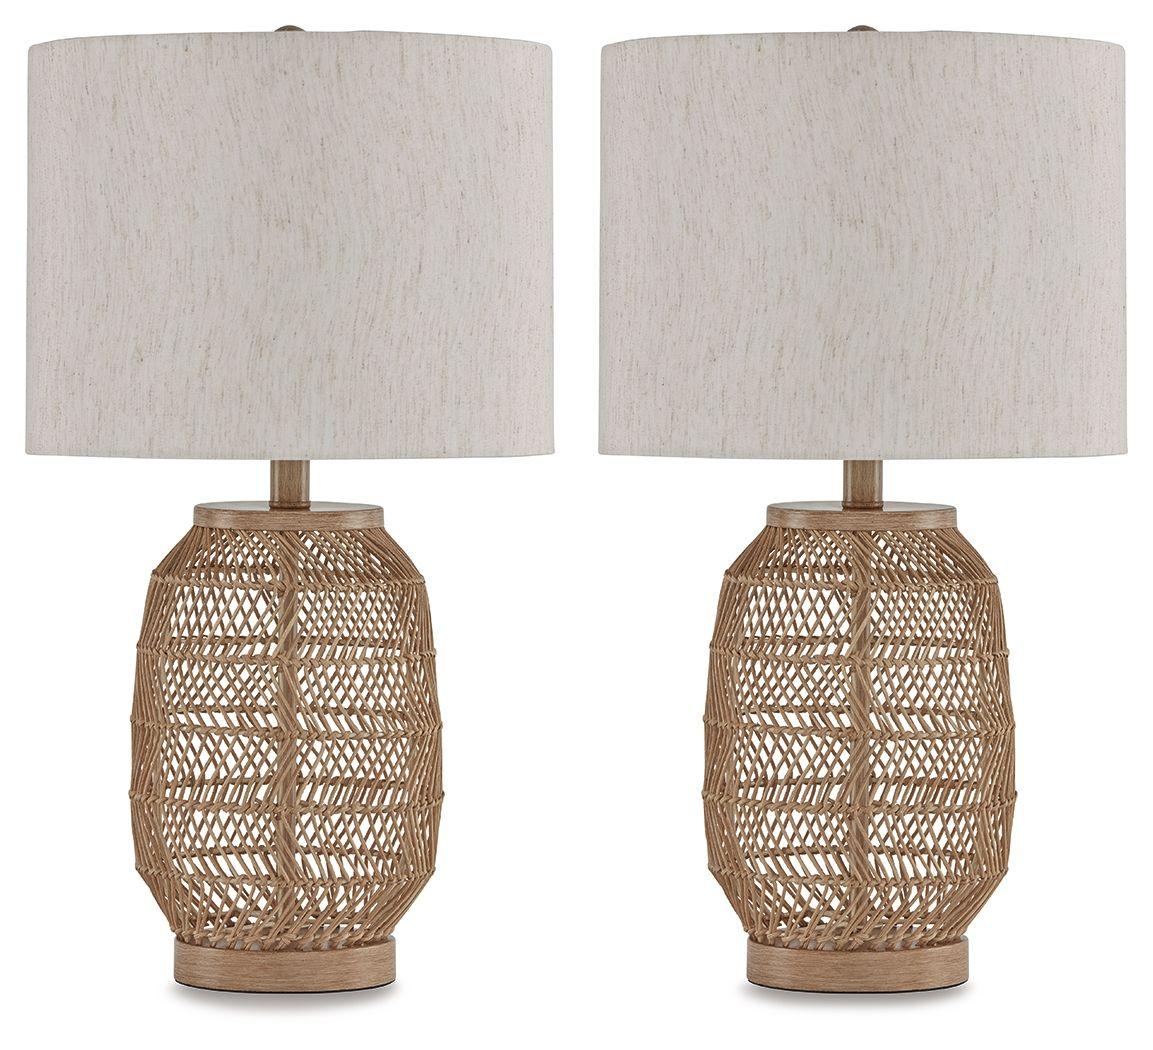 Signature Design by Ashley® - Orenman - Light Brown - Rattan Table Lamp (Set of 2) - 5th Avenue Furniture